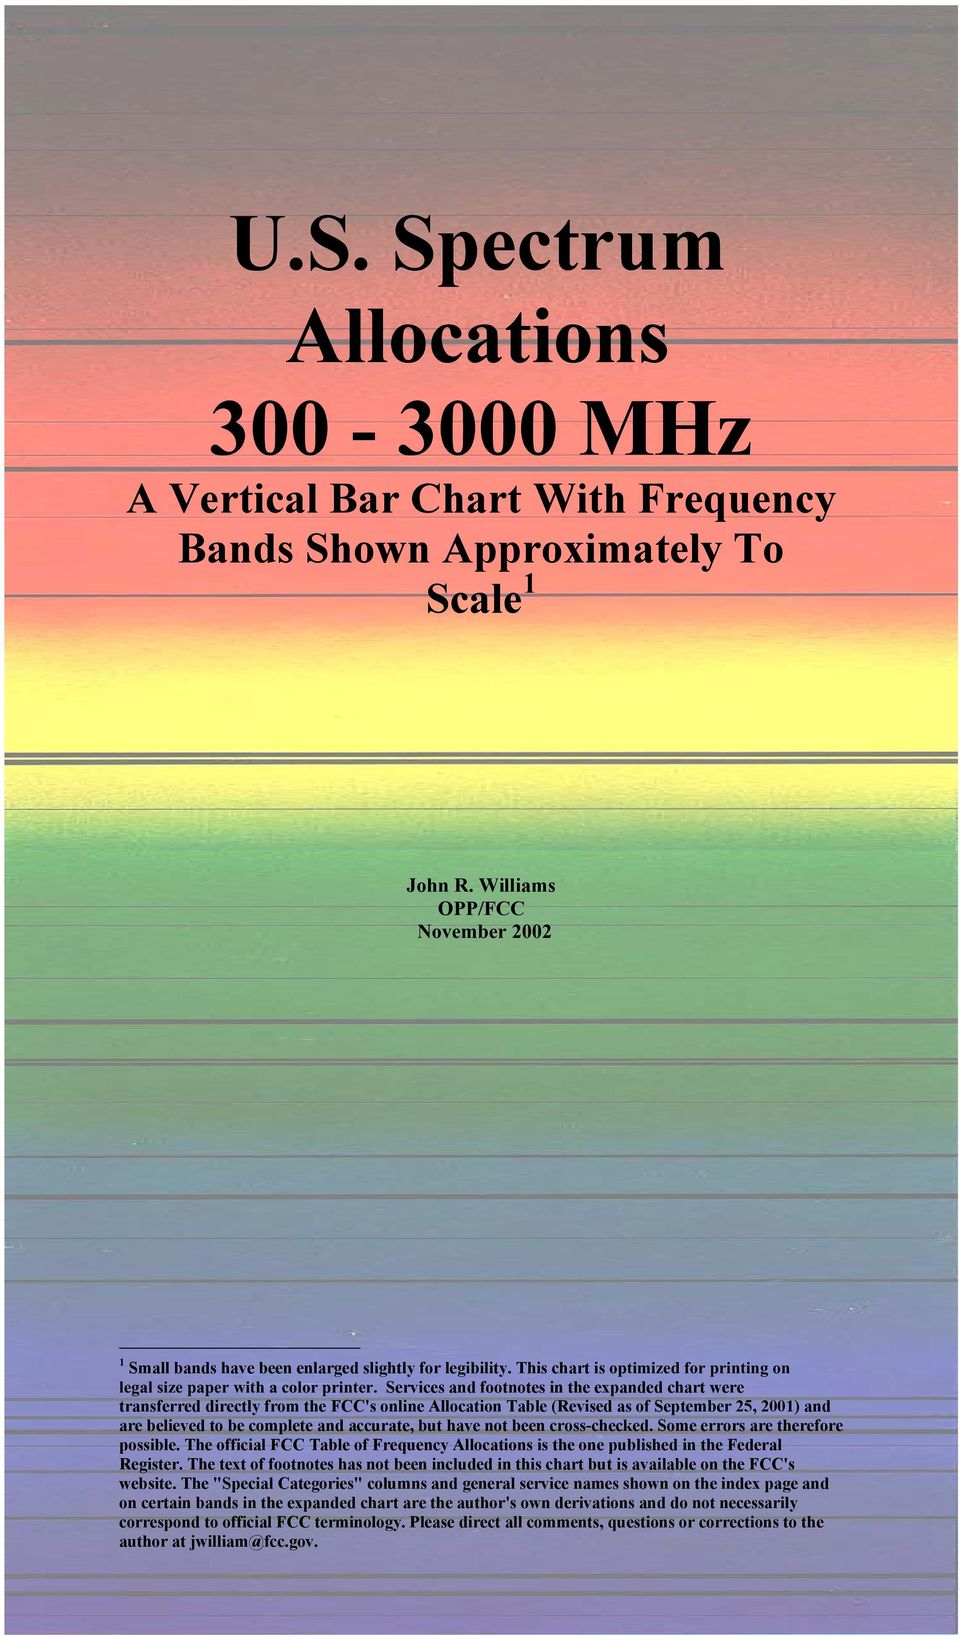 U.S. Spectrum Allocations MHz A Vertical Bar Chart With ...